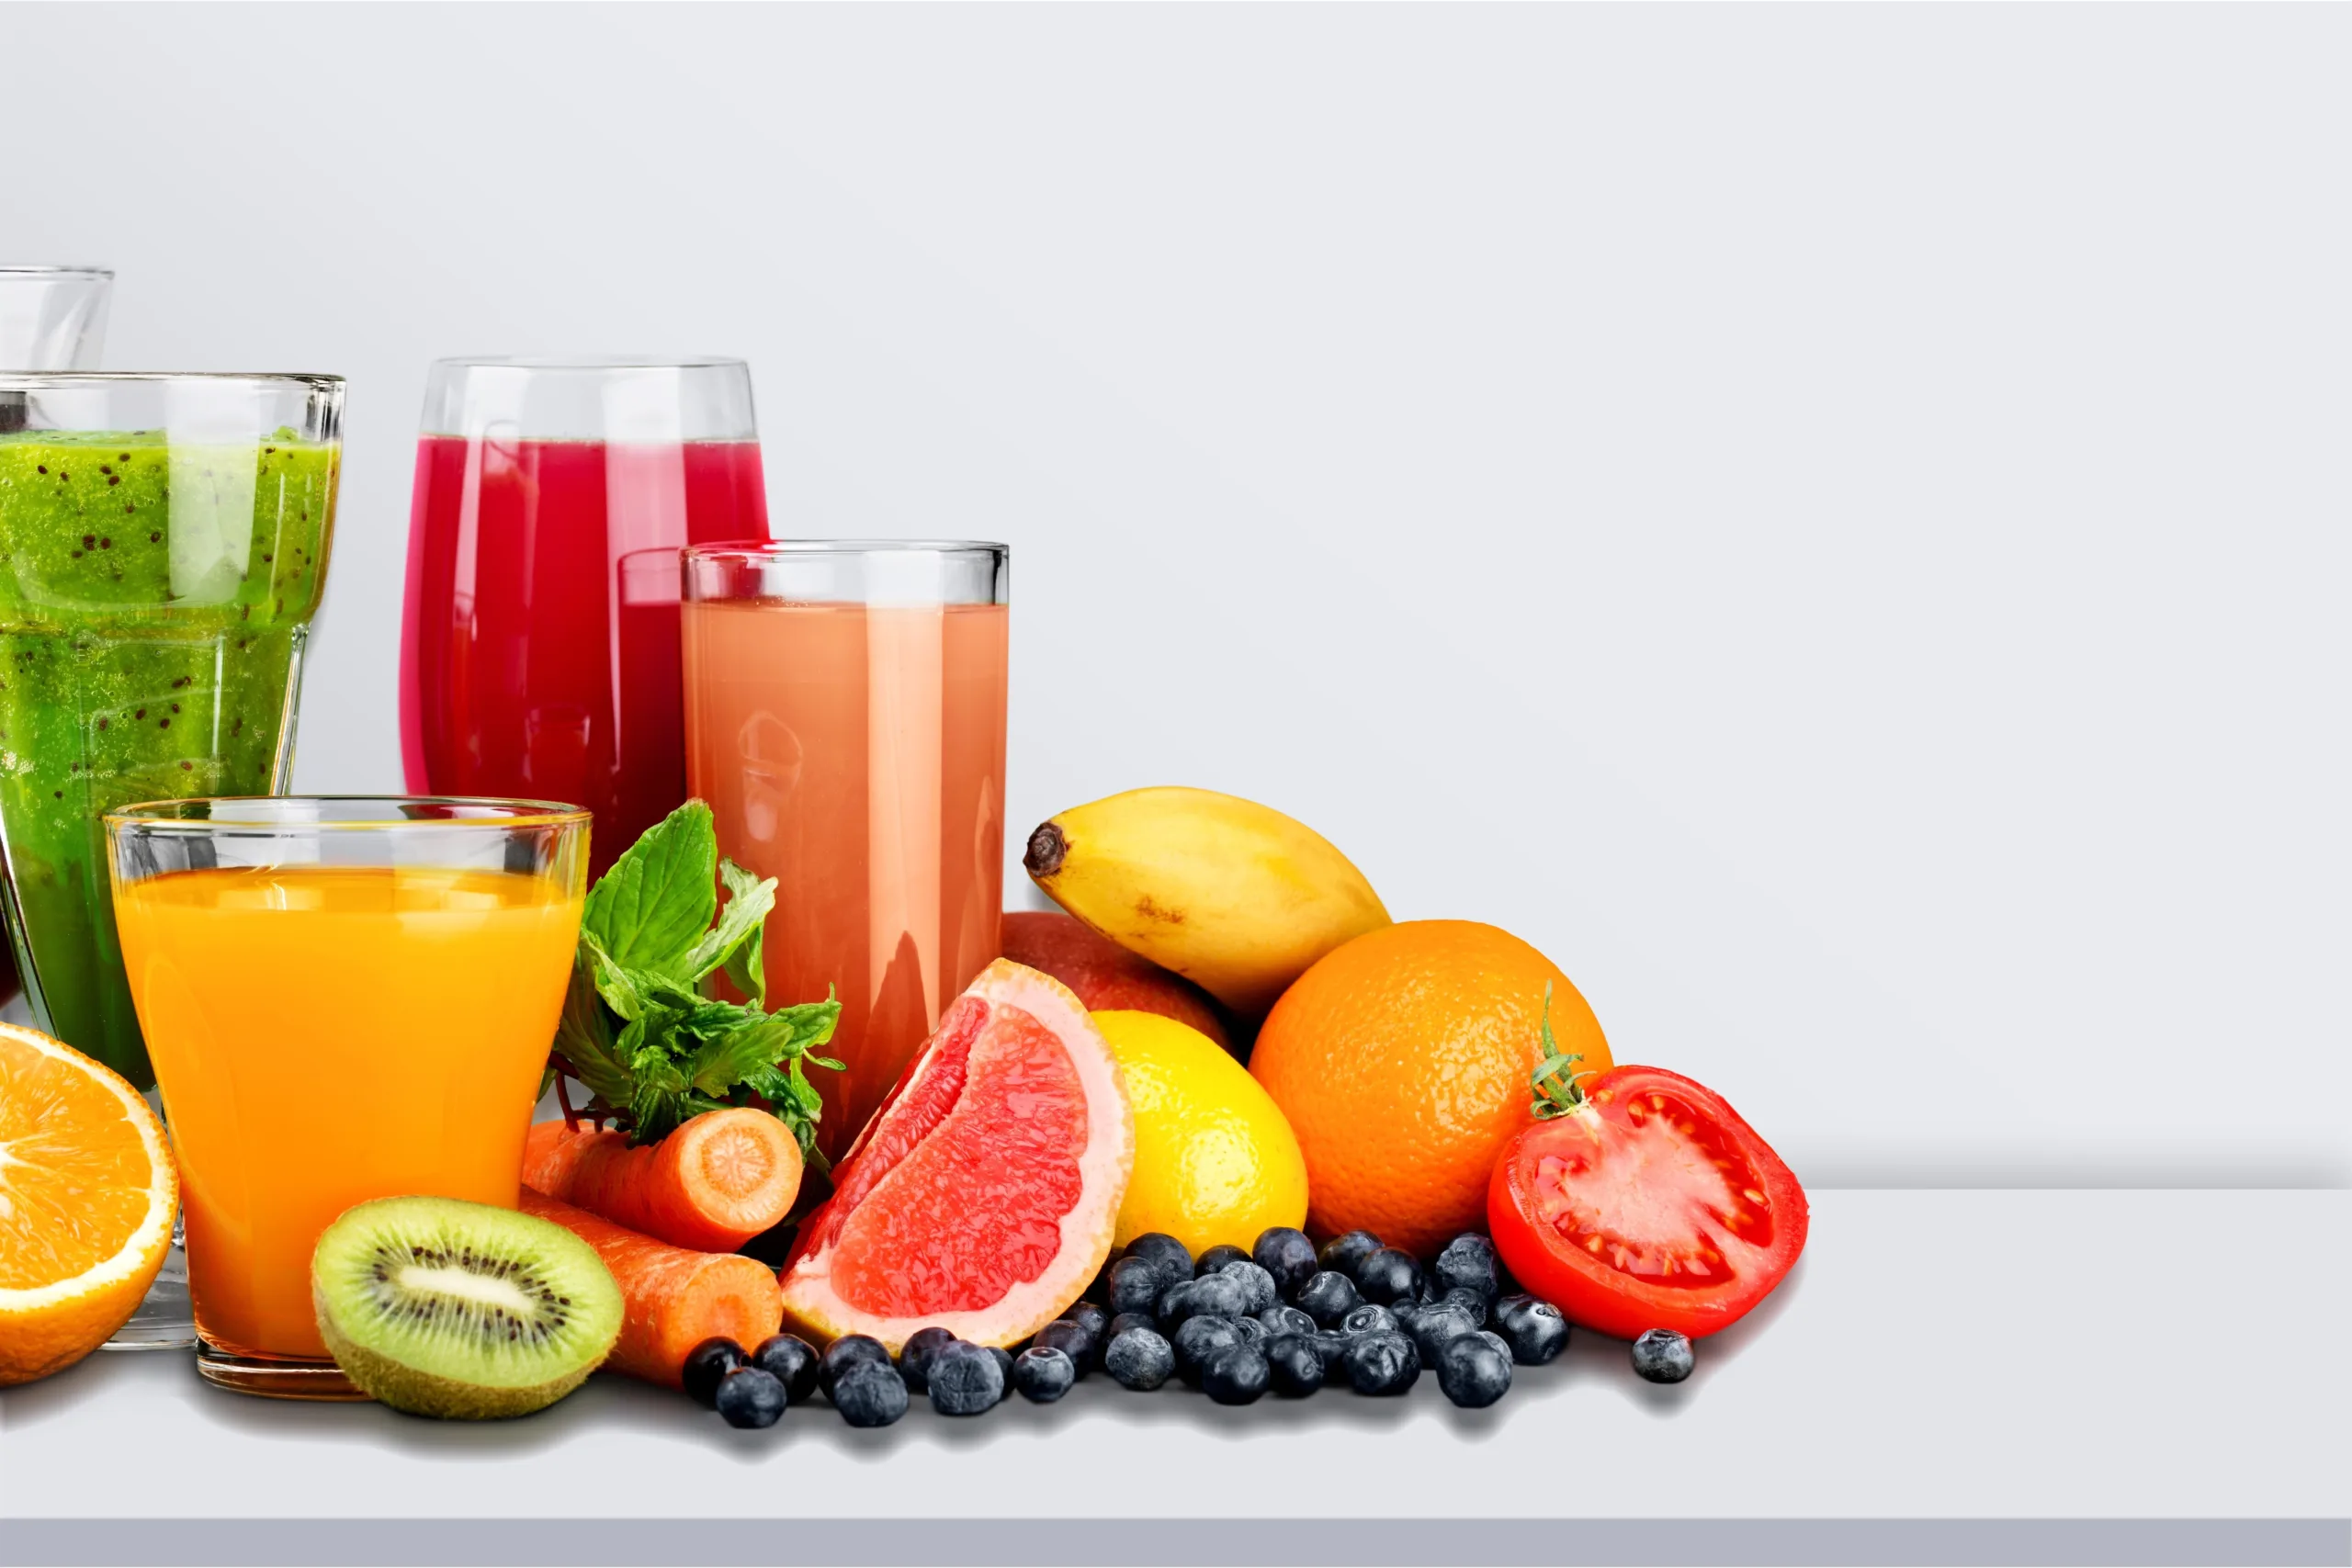 THE RISE OF NATURAL JUICE CONSUMPTION AND THE MACHINERY INVOLVED